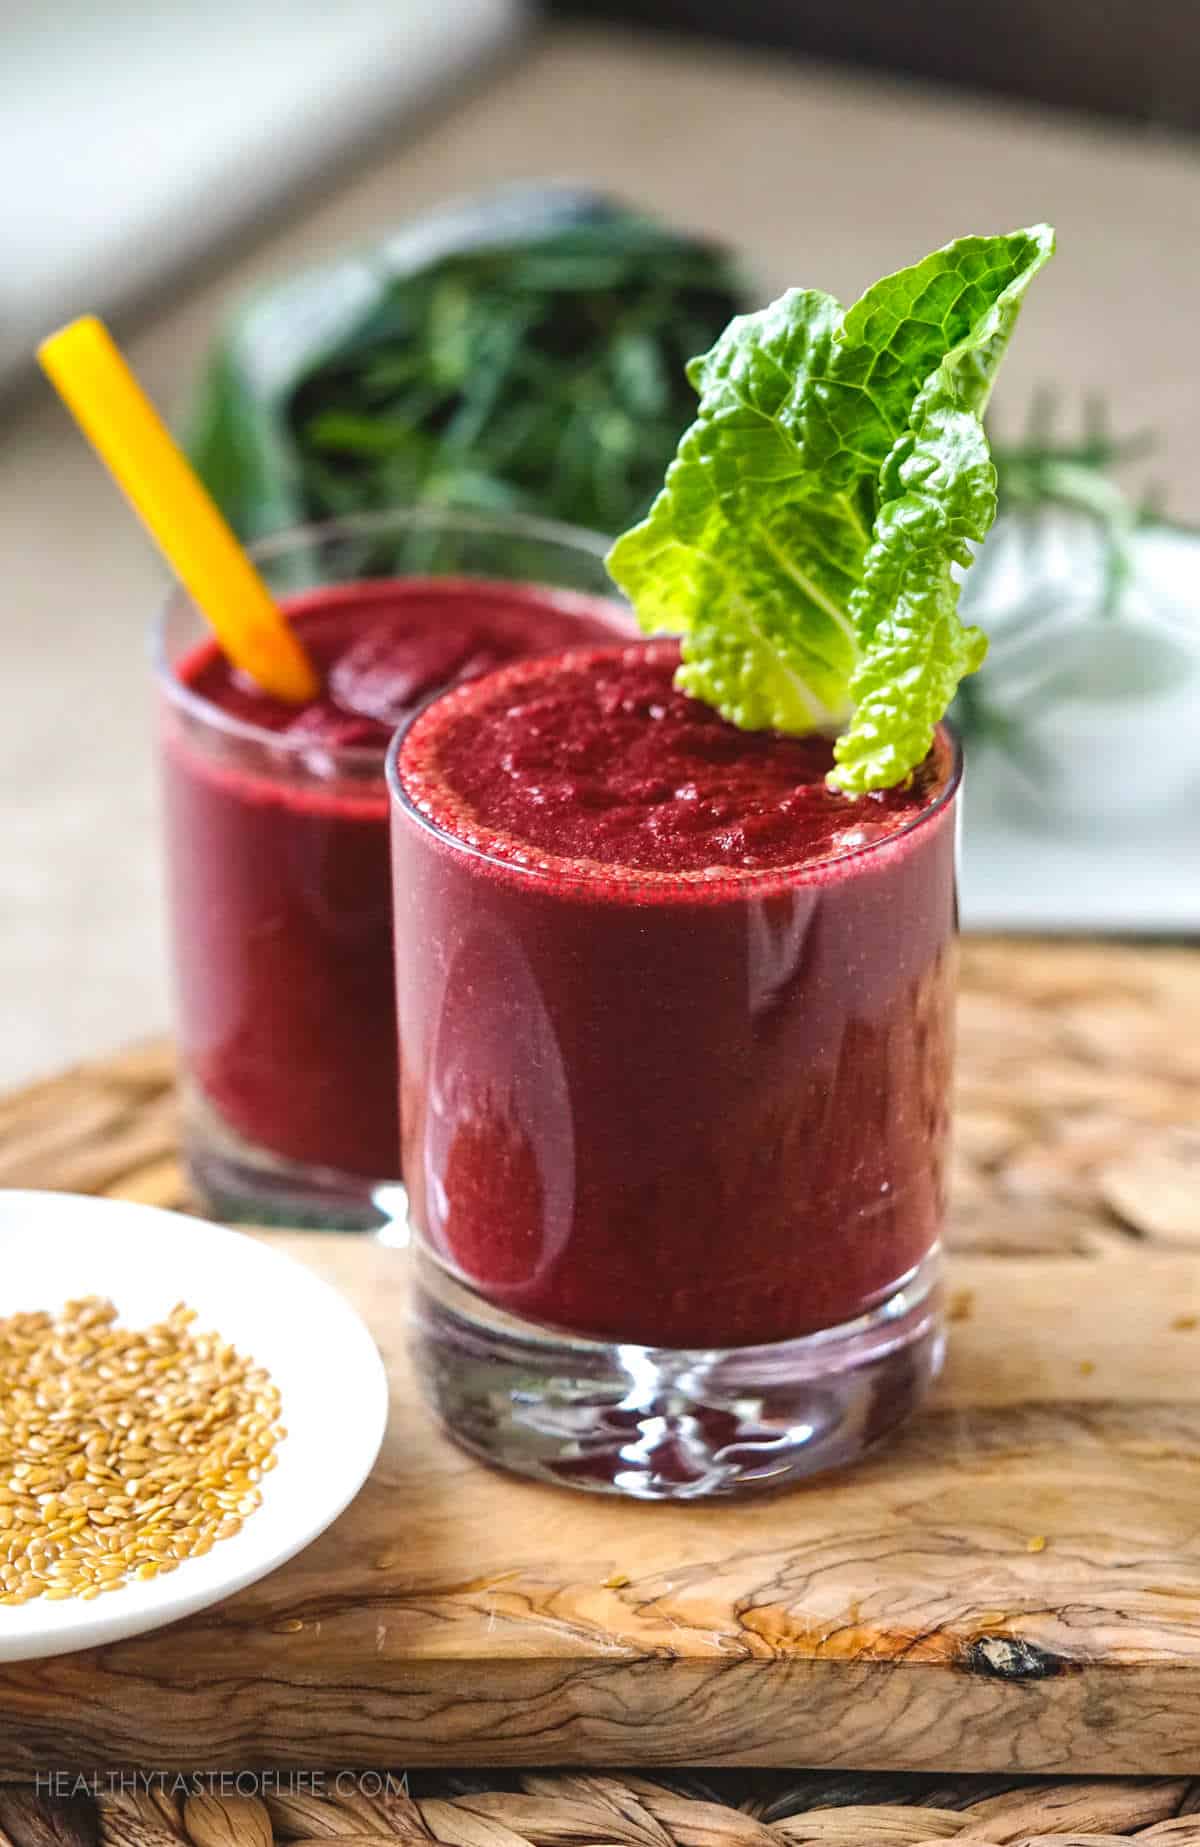 Best Natural Colon Cleanse, Liver Detox Smoothie and Liver Cleansing Smoothie Recipe.